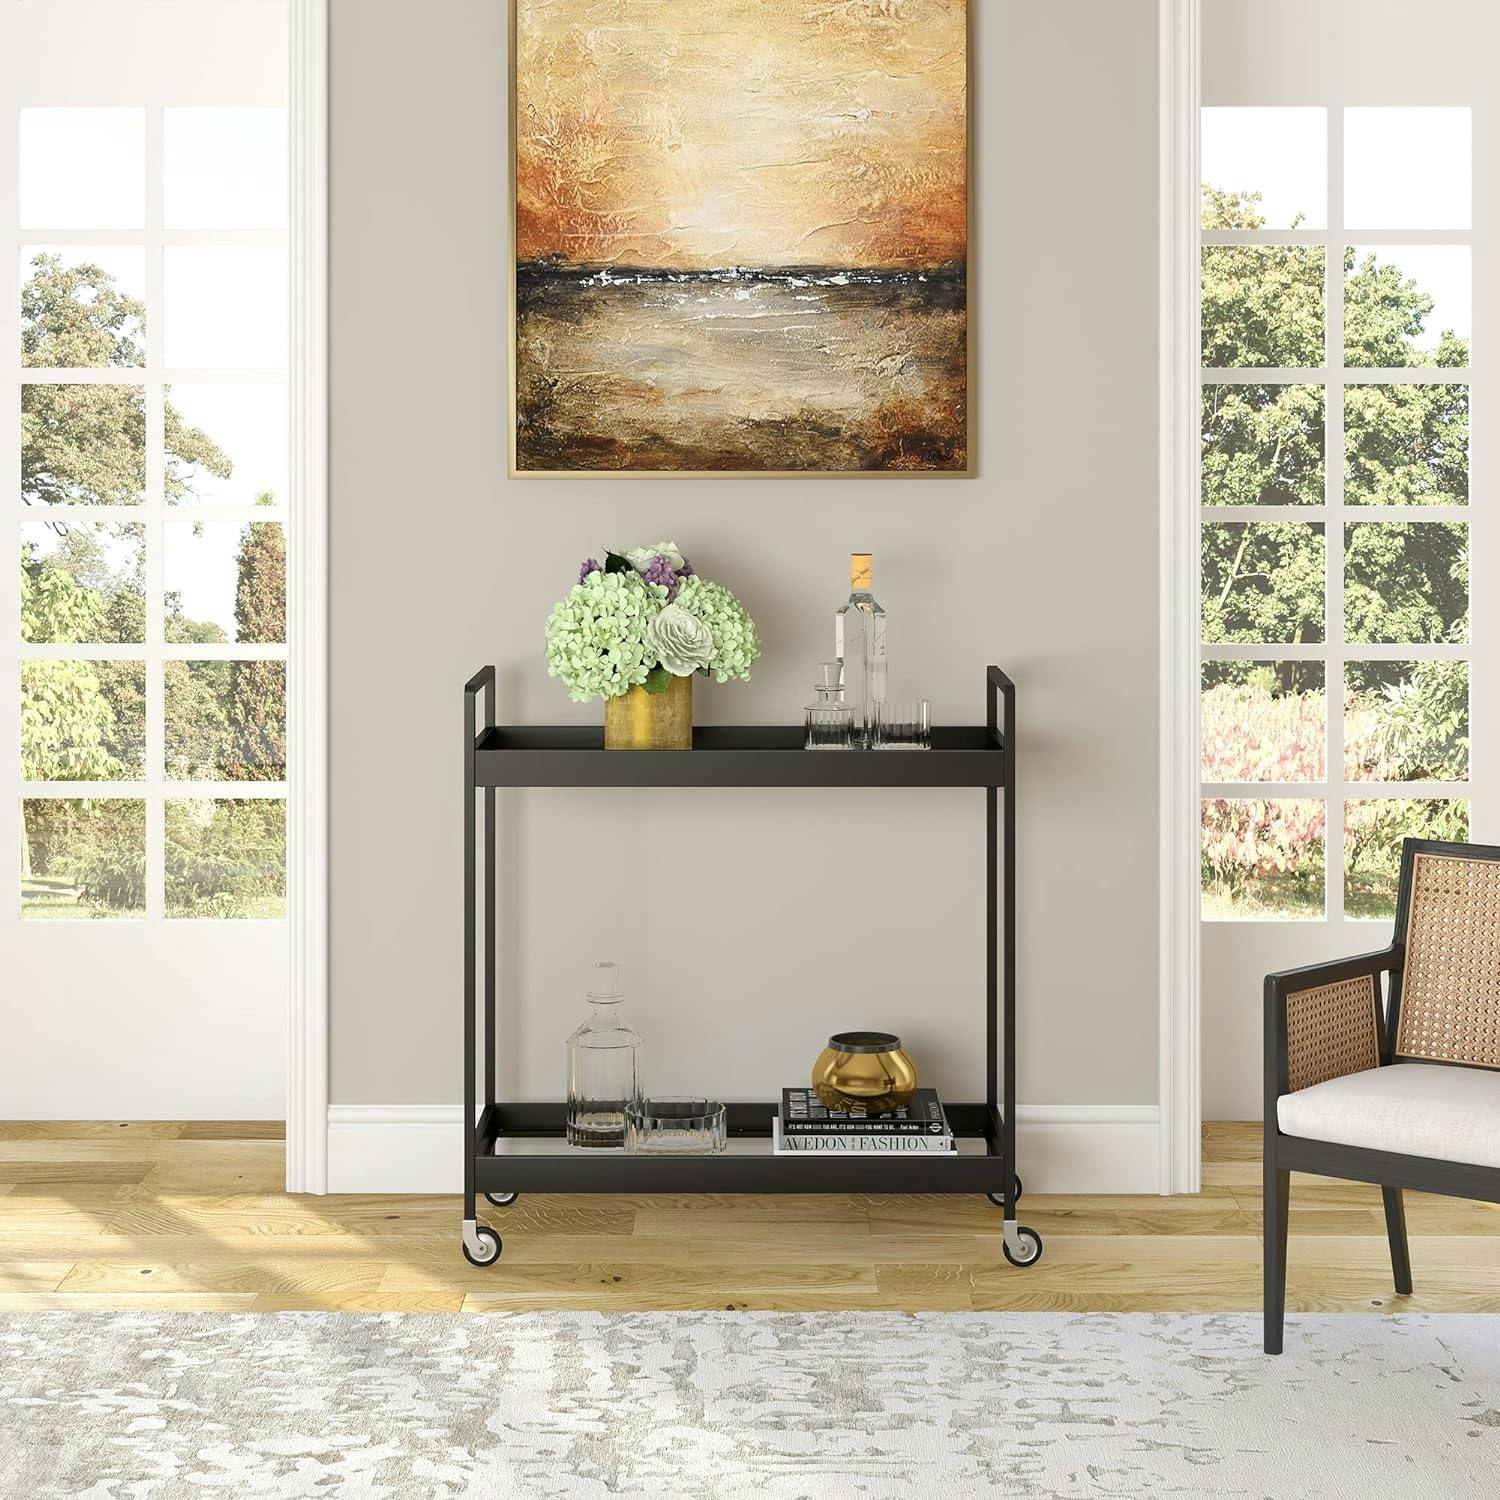 Evelyn & Zoe Contemporary Blackened Bronze Bar Cart with Tempered Glass Shelves